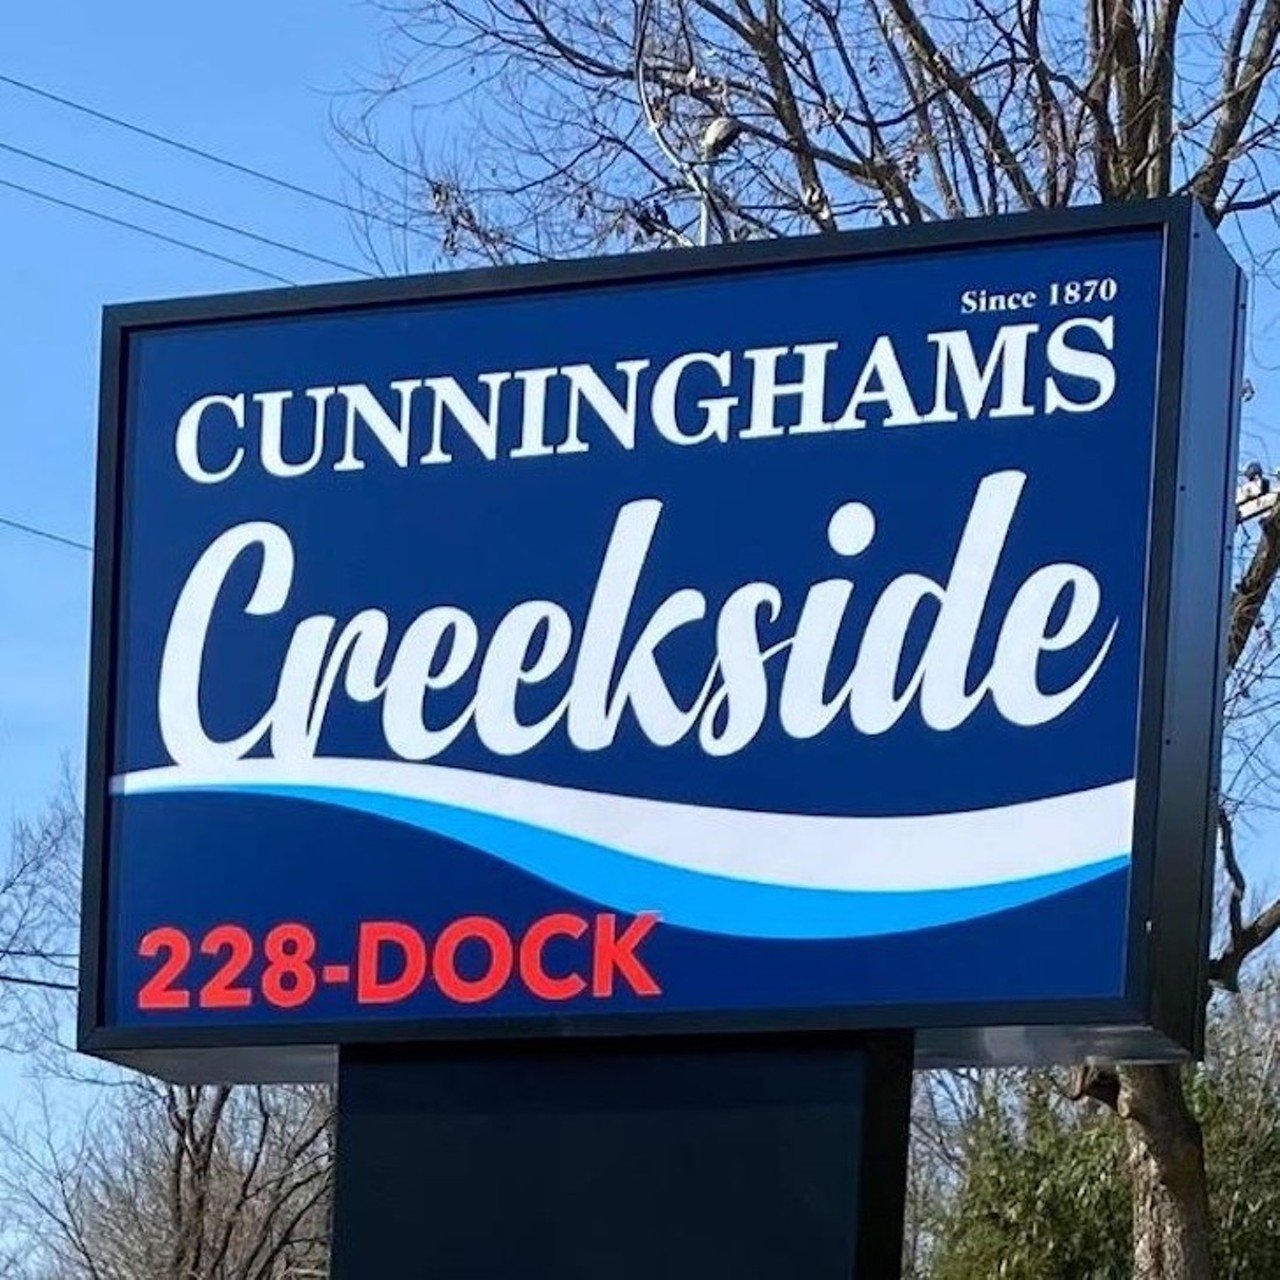 Cunningham&#146;s Creekside
6301 River Road
Cunningham&#146;s offers a buffet style brunch every Sunday, starting at 11 a.m. Drink specials include Mimosas for $1.99 and House Bloody Marys for $3.99.
